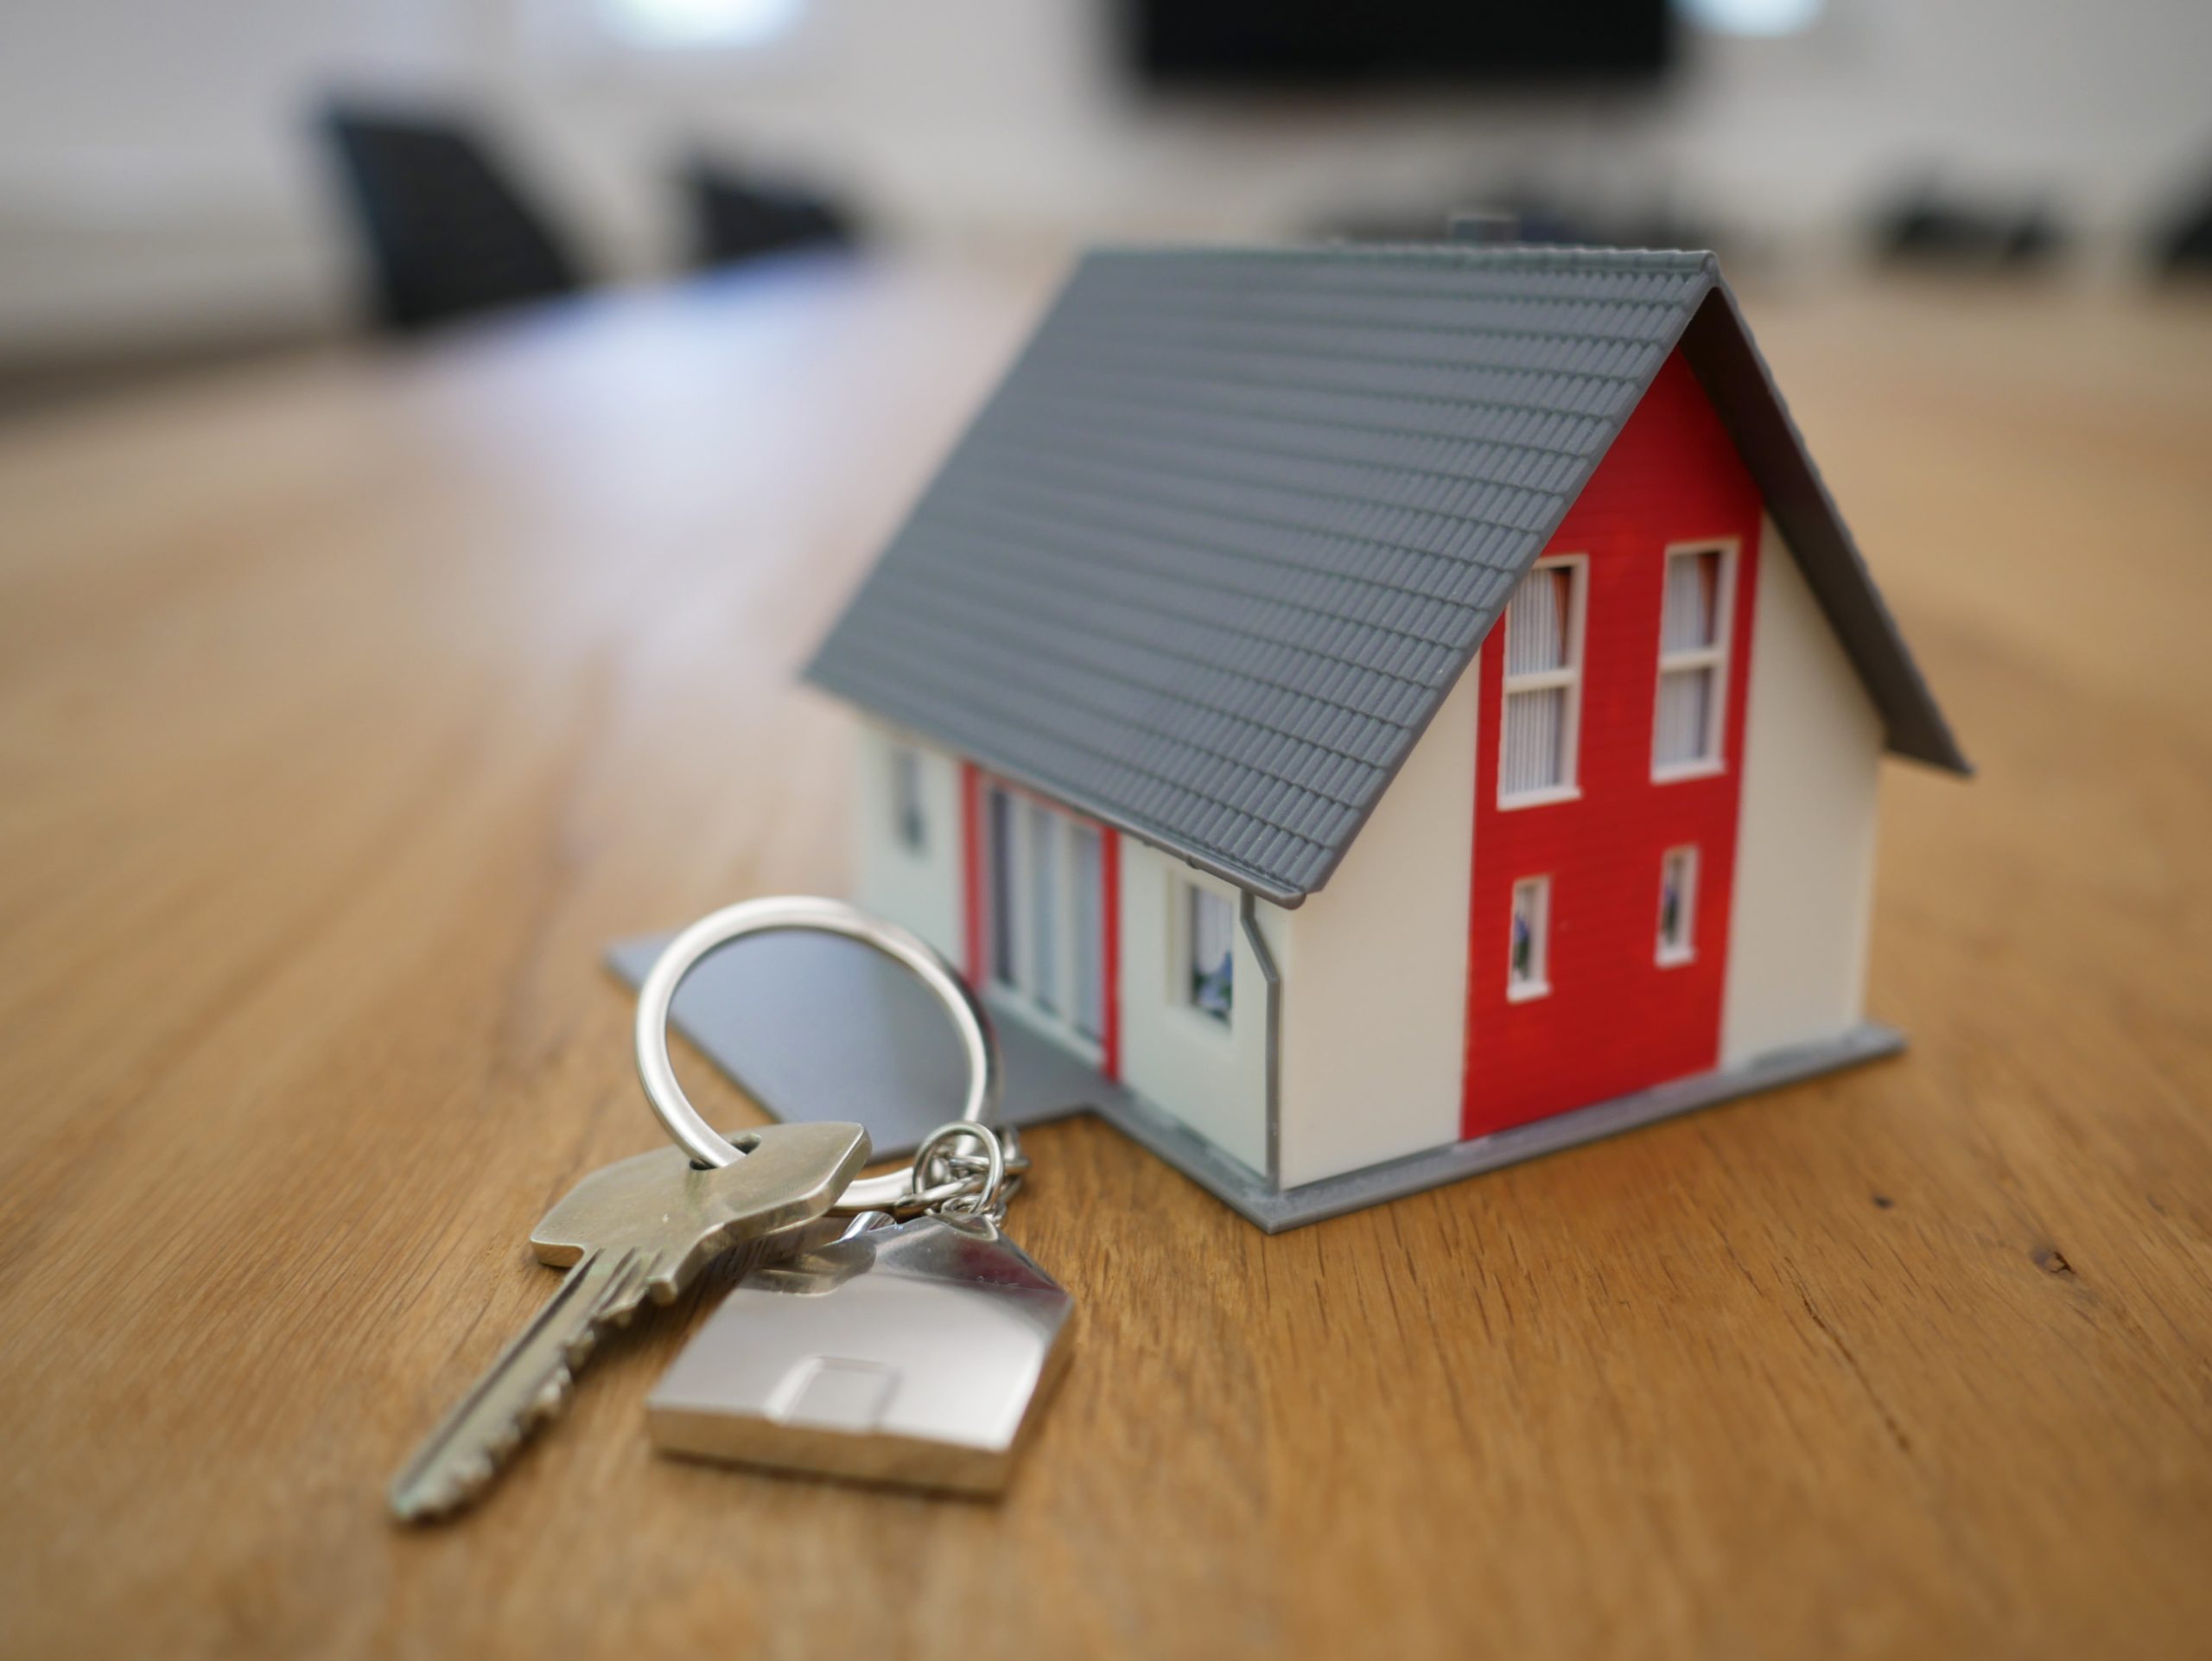 Husband, Wife, Partner, Significant Other:  Risks of Home Buying as an Unmarried Couple